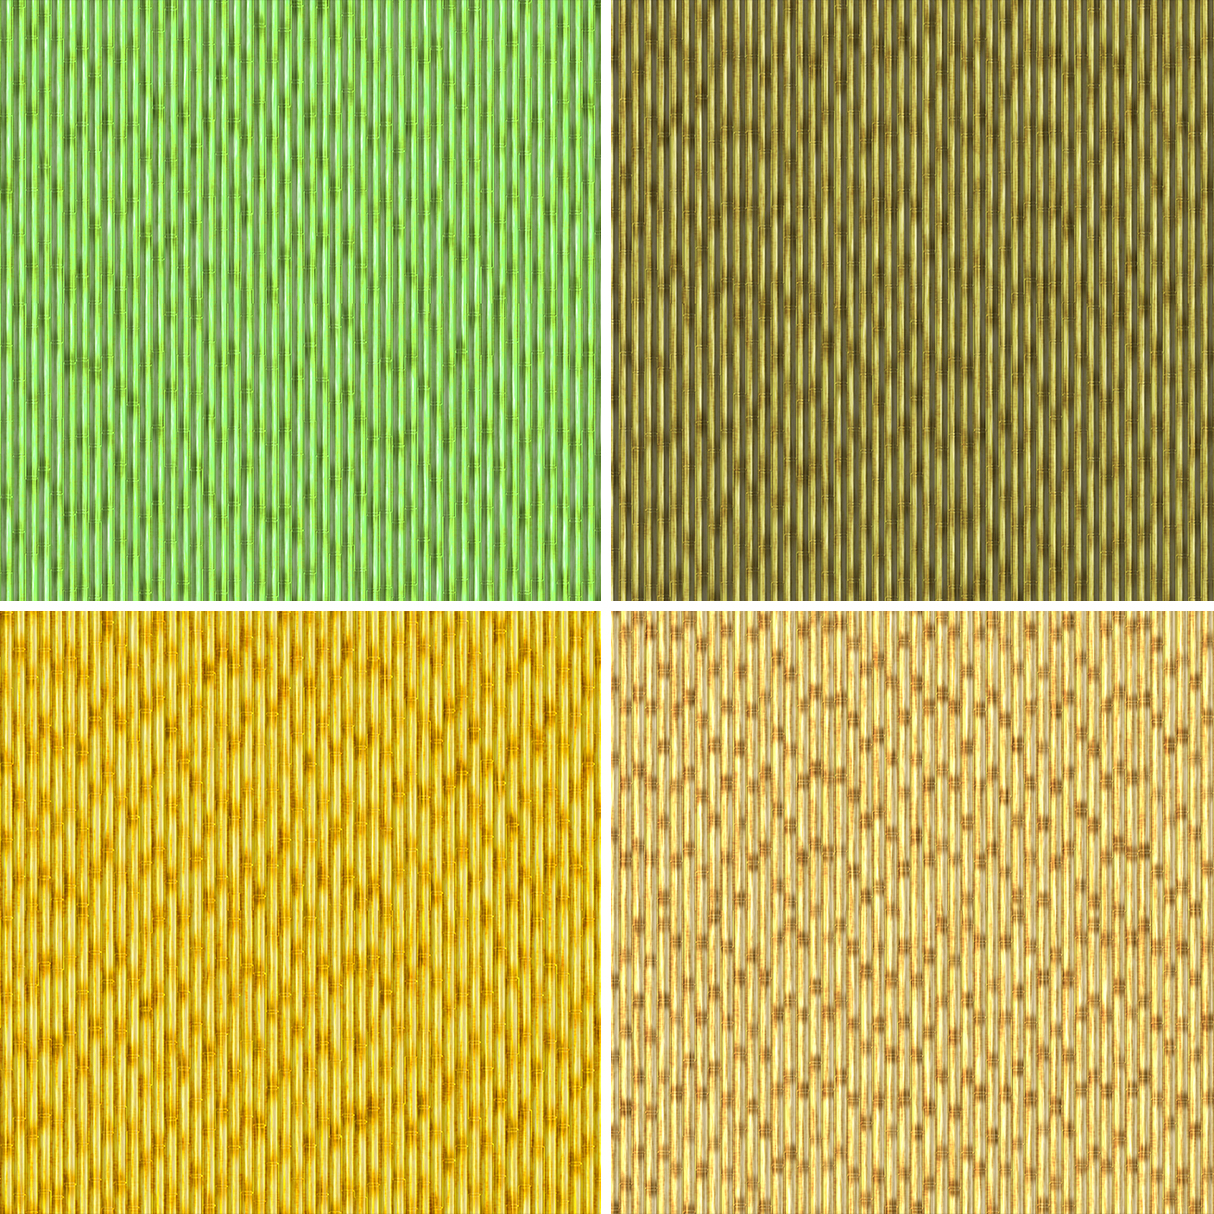 20 Bamboo Background Textures Square Samples Preview 5